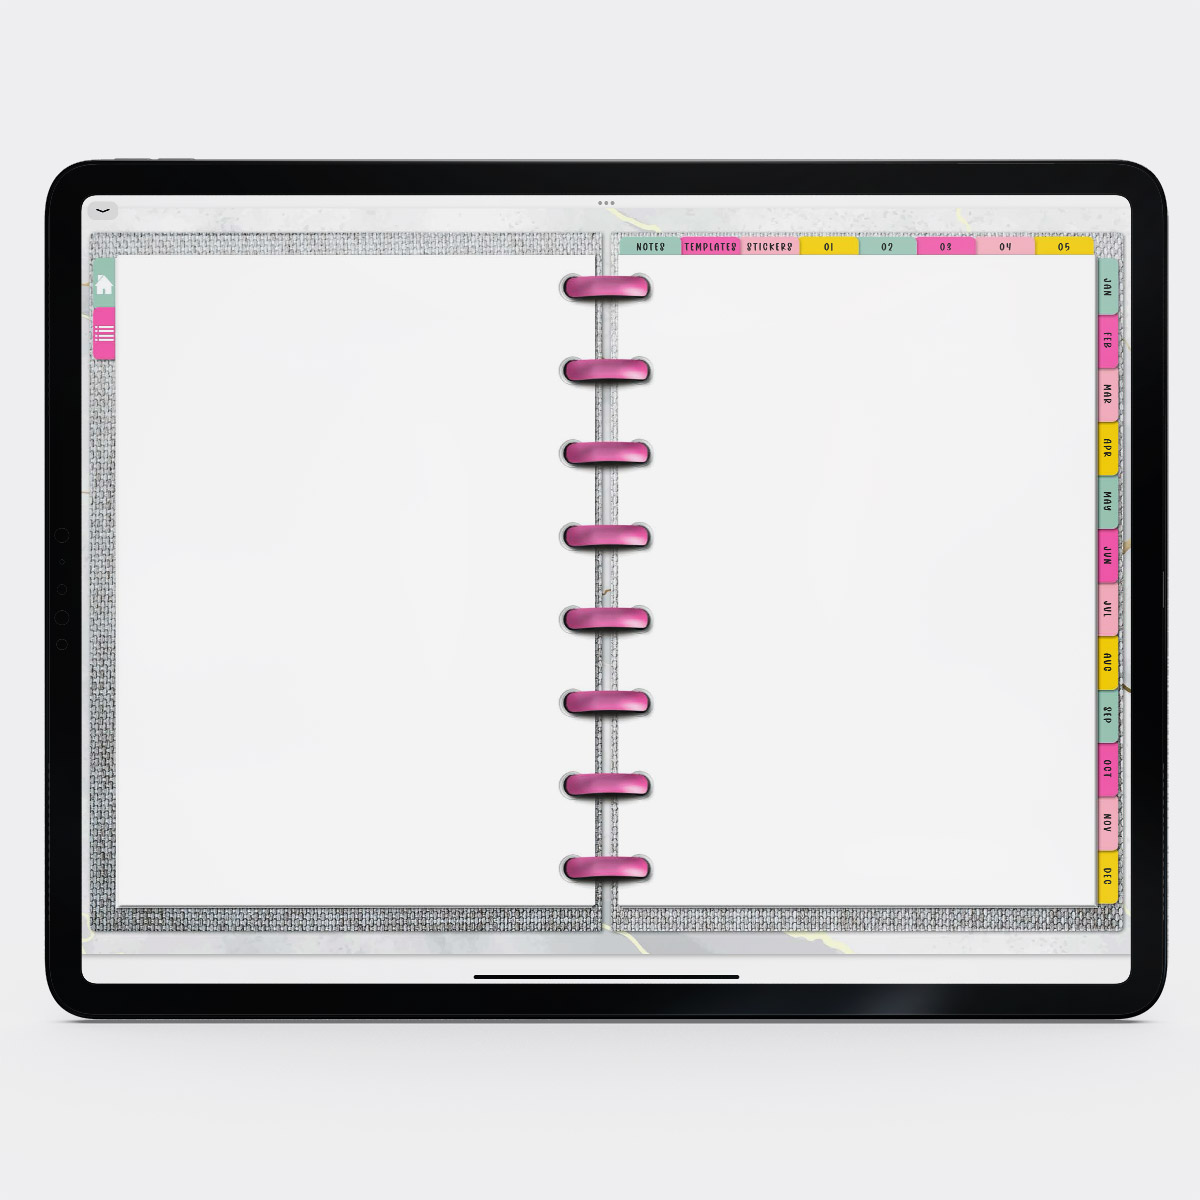 This image shows the free digital planner you can get in this post. It is open to the blank sticker page section.